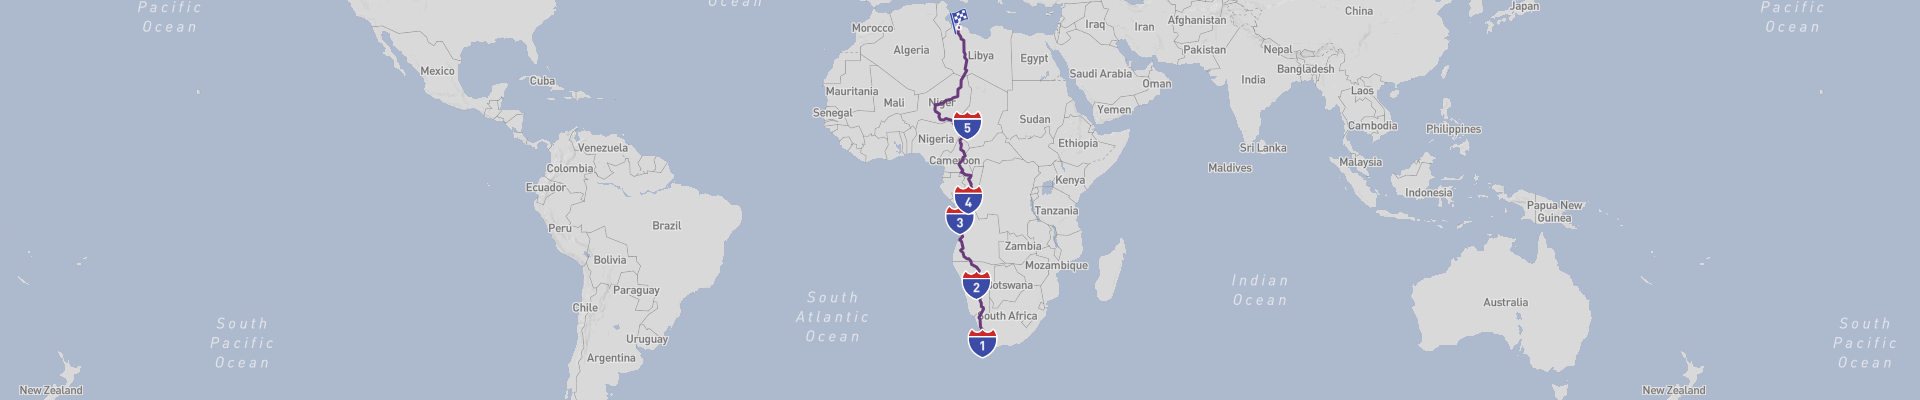 Cape Town to Tripoli Trans-Africa Road Trip